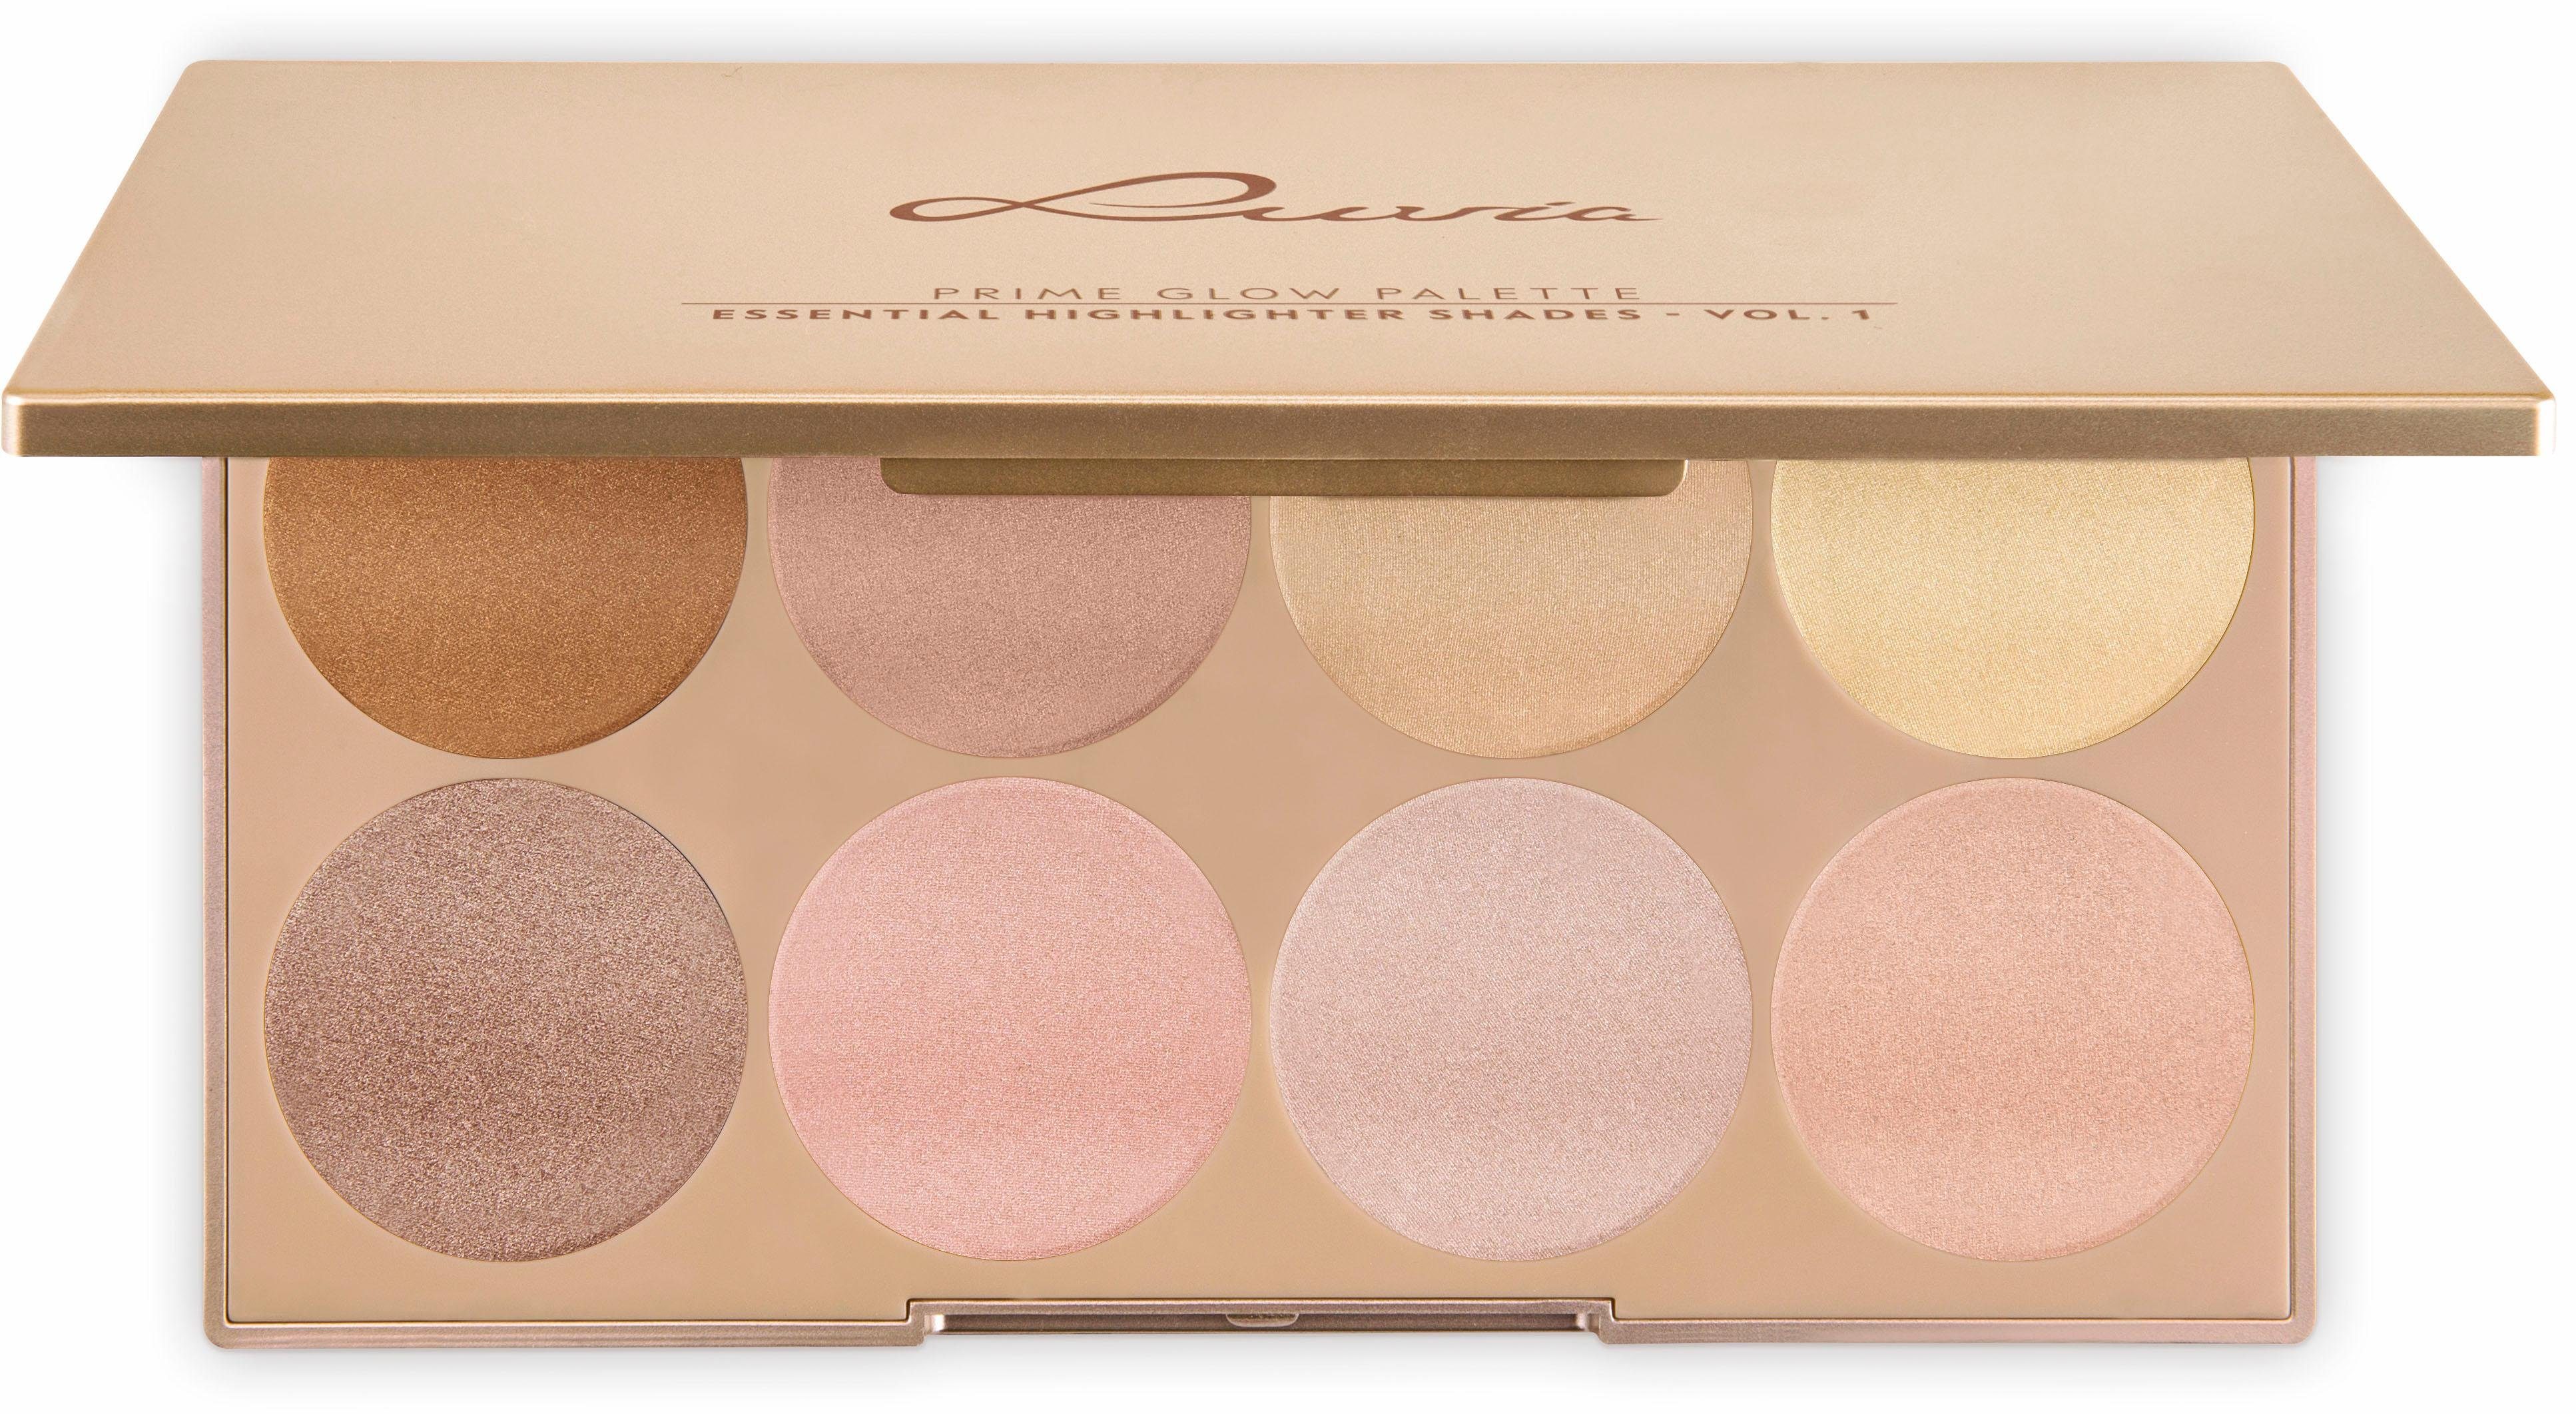 Cosmetics 8-tlg., Vol. - Prime Essential Shades Glow 1, Farben Contouring Luvia 8 Highlighter-Palette